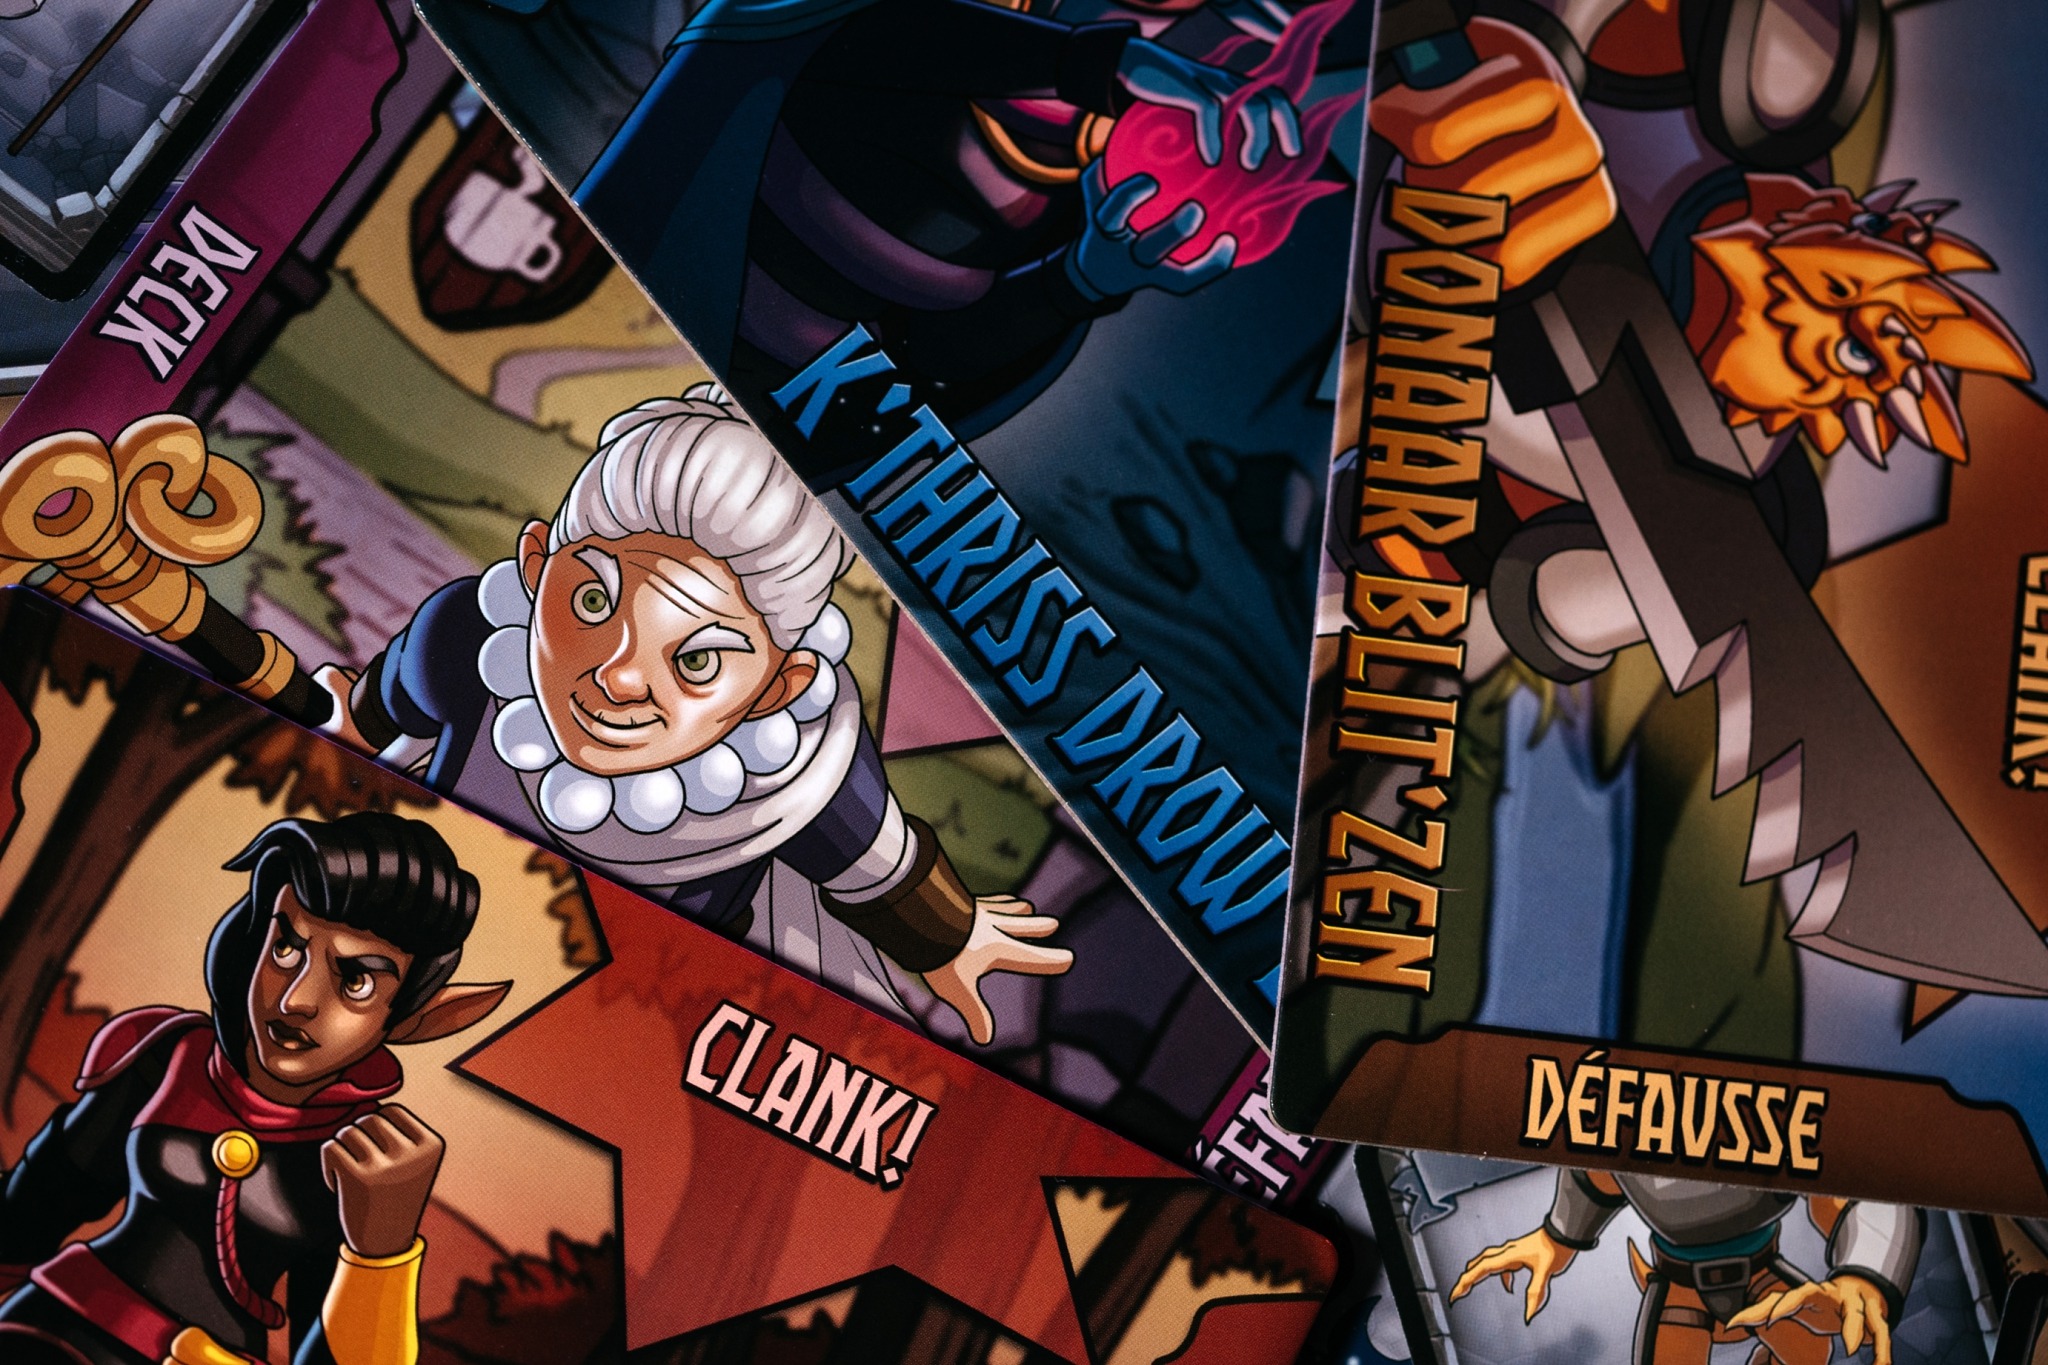 Clank! Legacy Acquisitions Incorporated